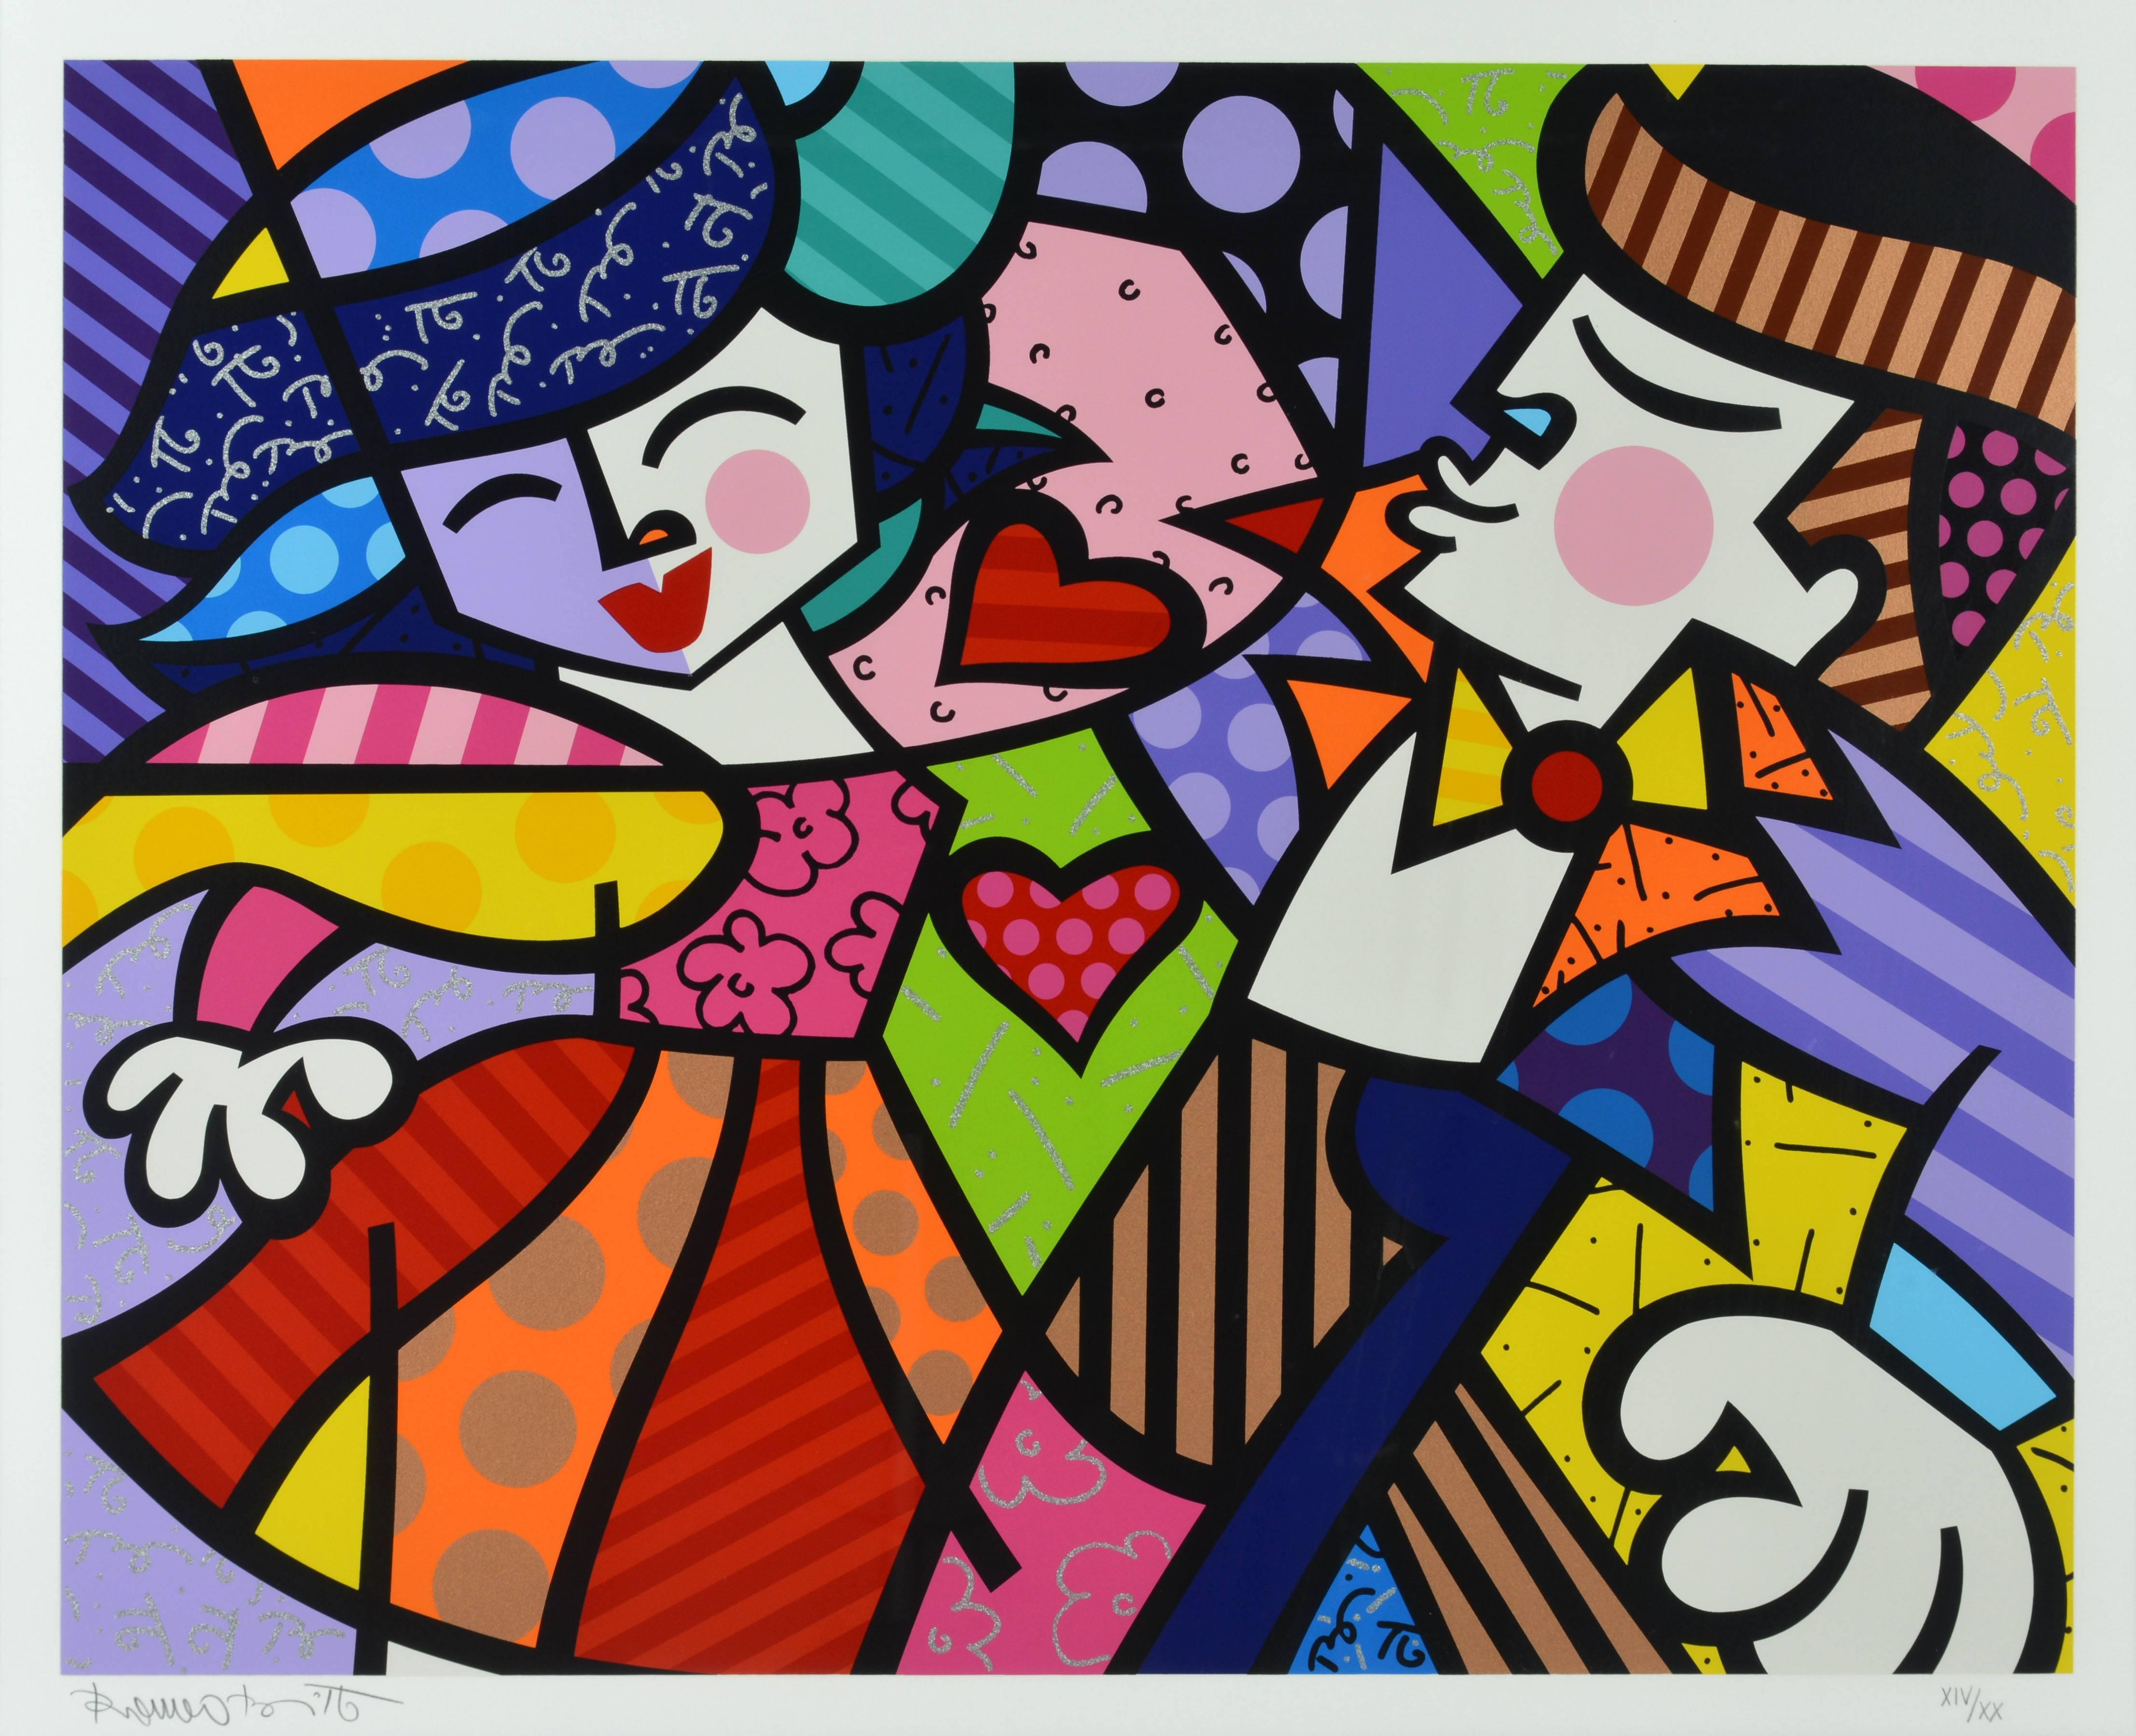 A rare vintage serigraph on paper by Romero Britto 'Swing' signed by the artist in pencil and numbered with Roman numerals XIV/XX (14/20). When some serigraphs are produced there will be a limited regular edition as well as a usually smaller edition